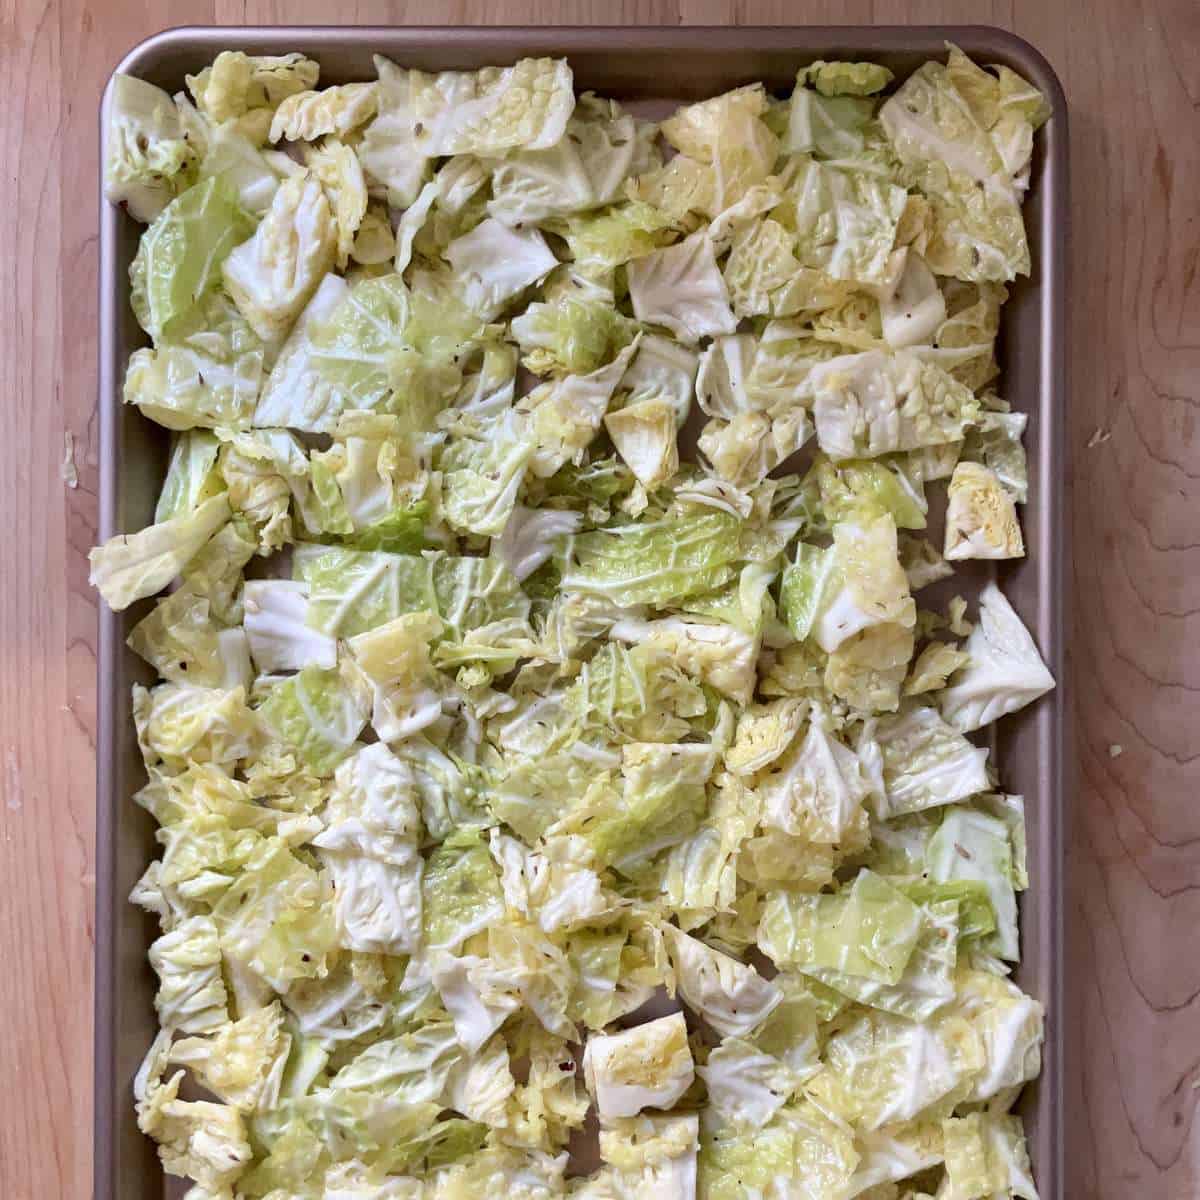 Chopped cabbage on a baking sheet.